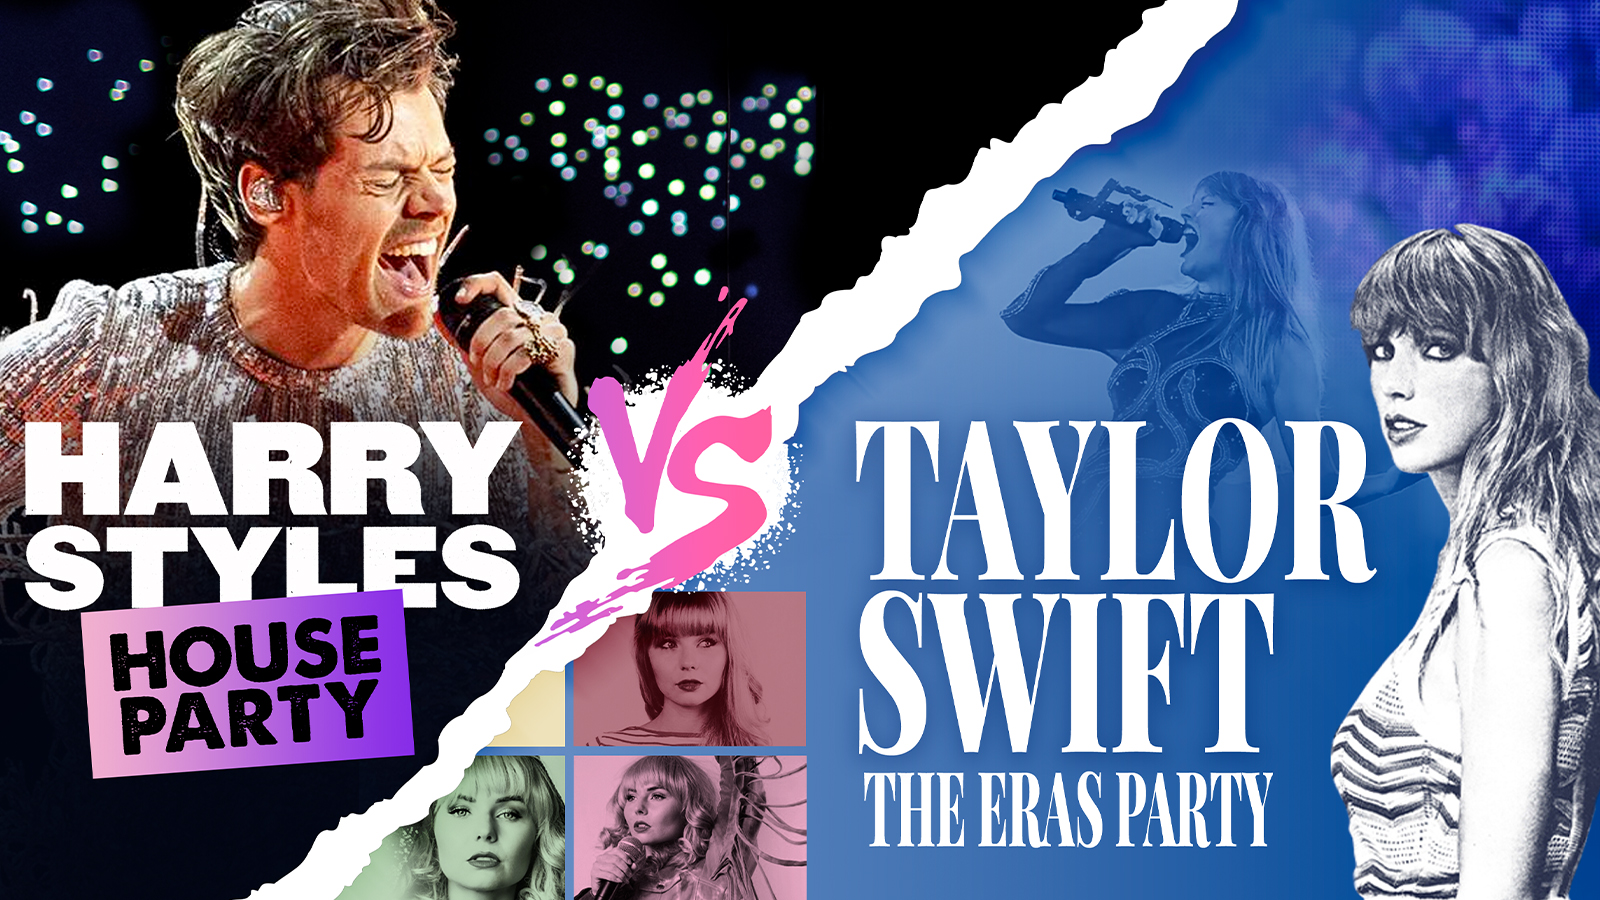 🚨 SOLD OUT! HARRY STYLES HOUSE PARTY VS TAYLOR SWIFT THE ERAS PARTY 🐍